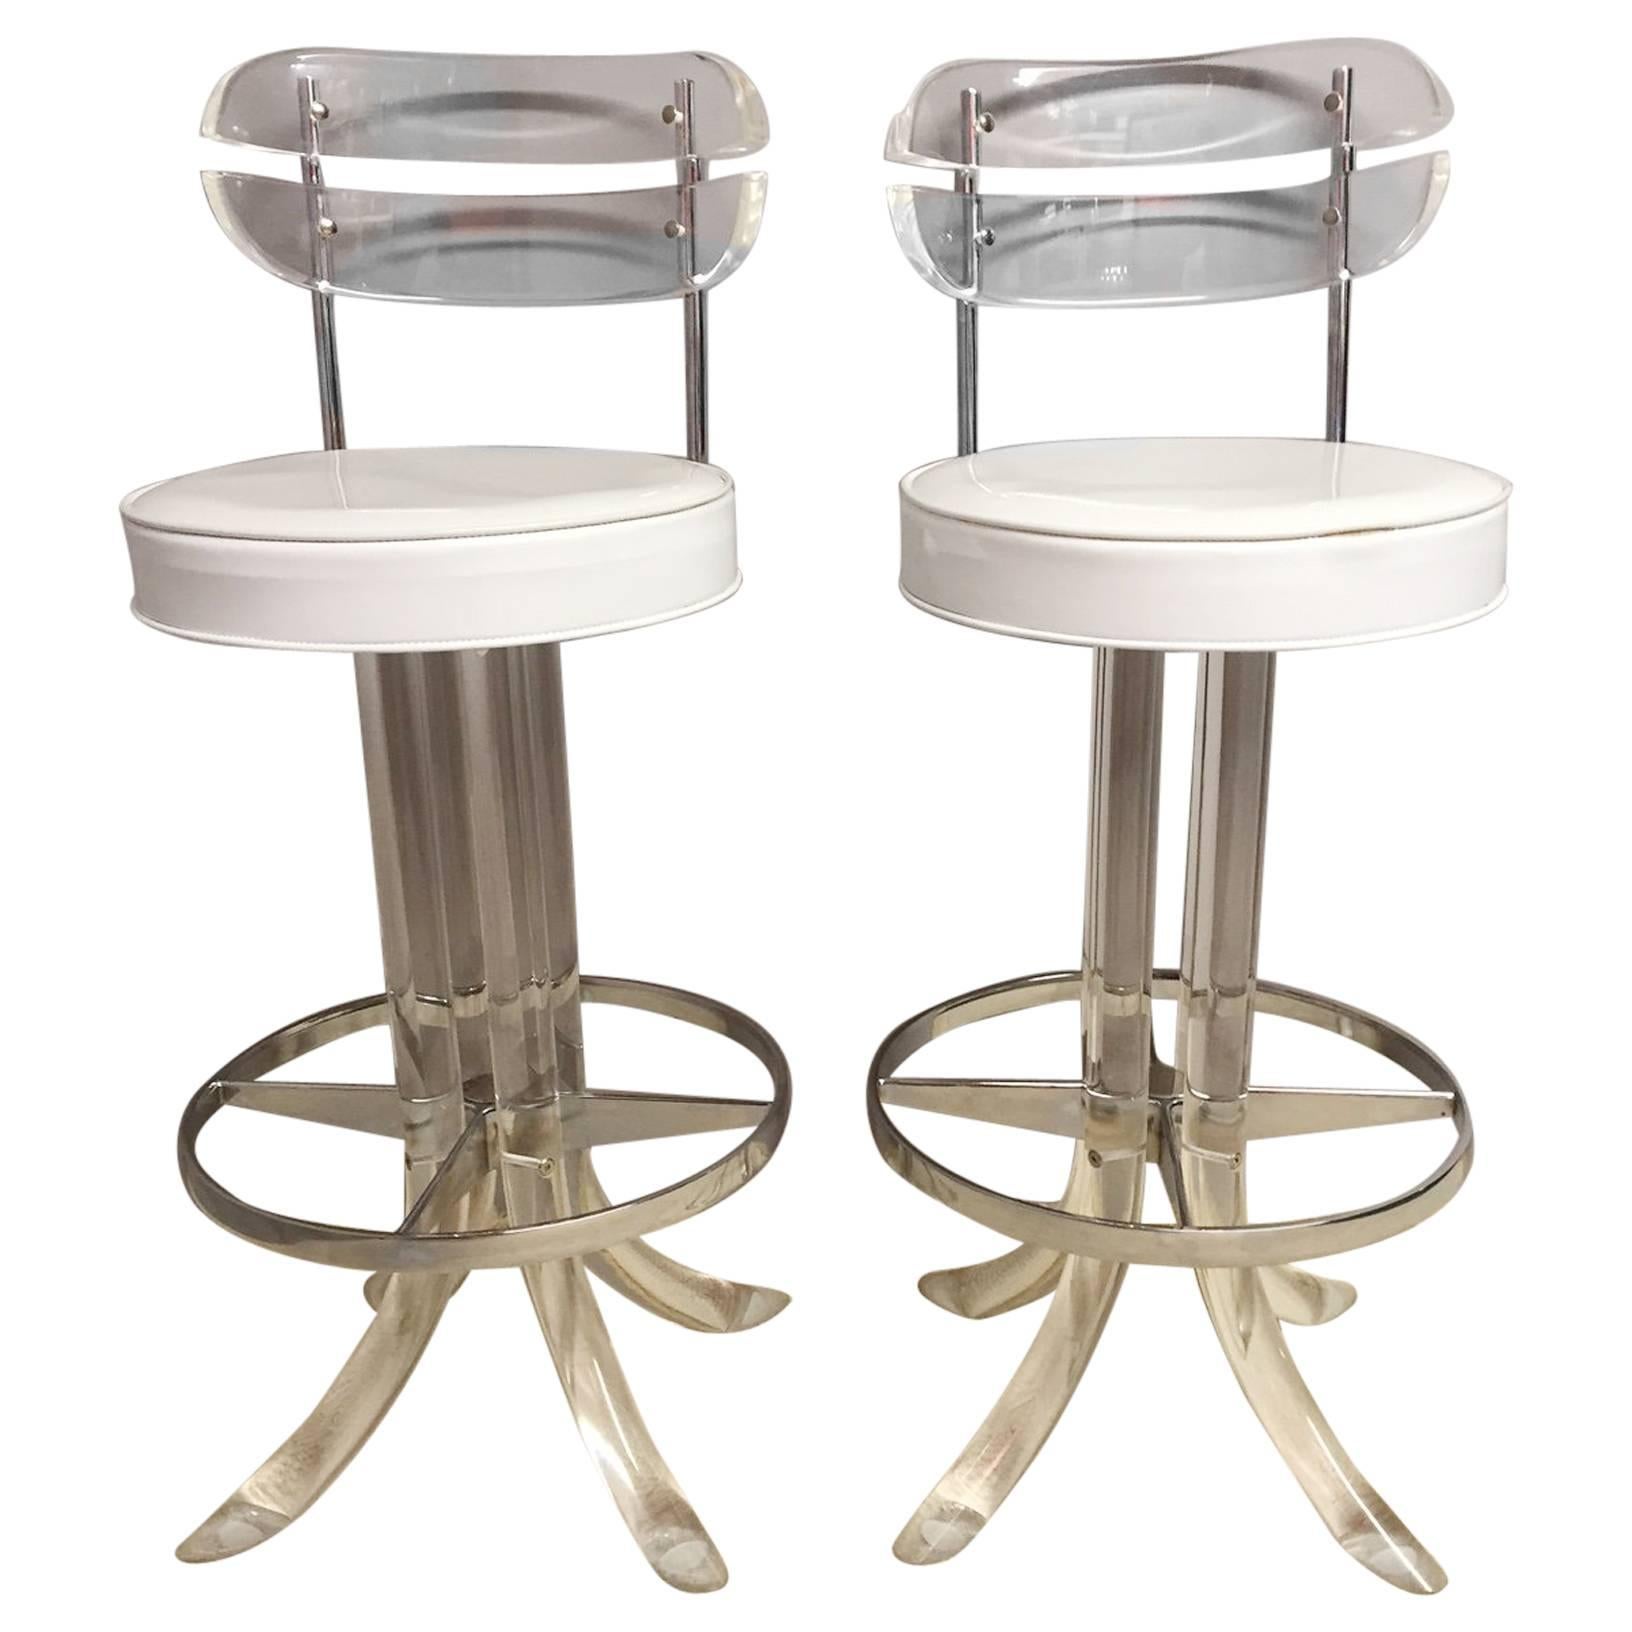 Glamorous Pair of Lucite, Chrome and Patent Leather Bar Stools